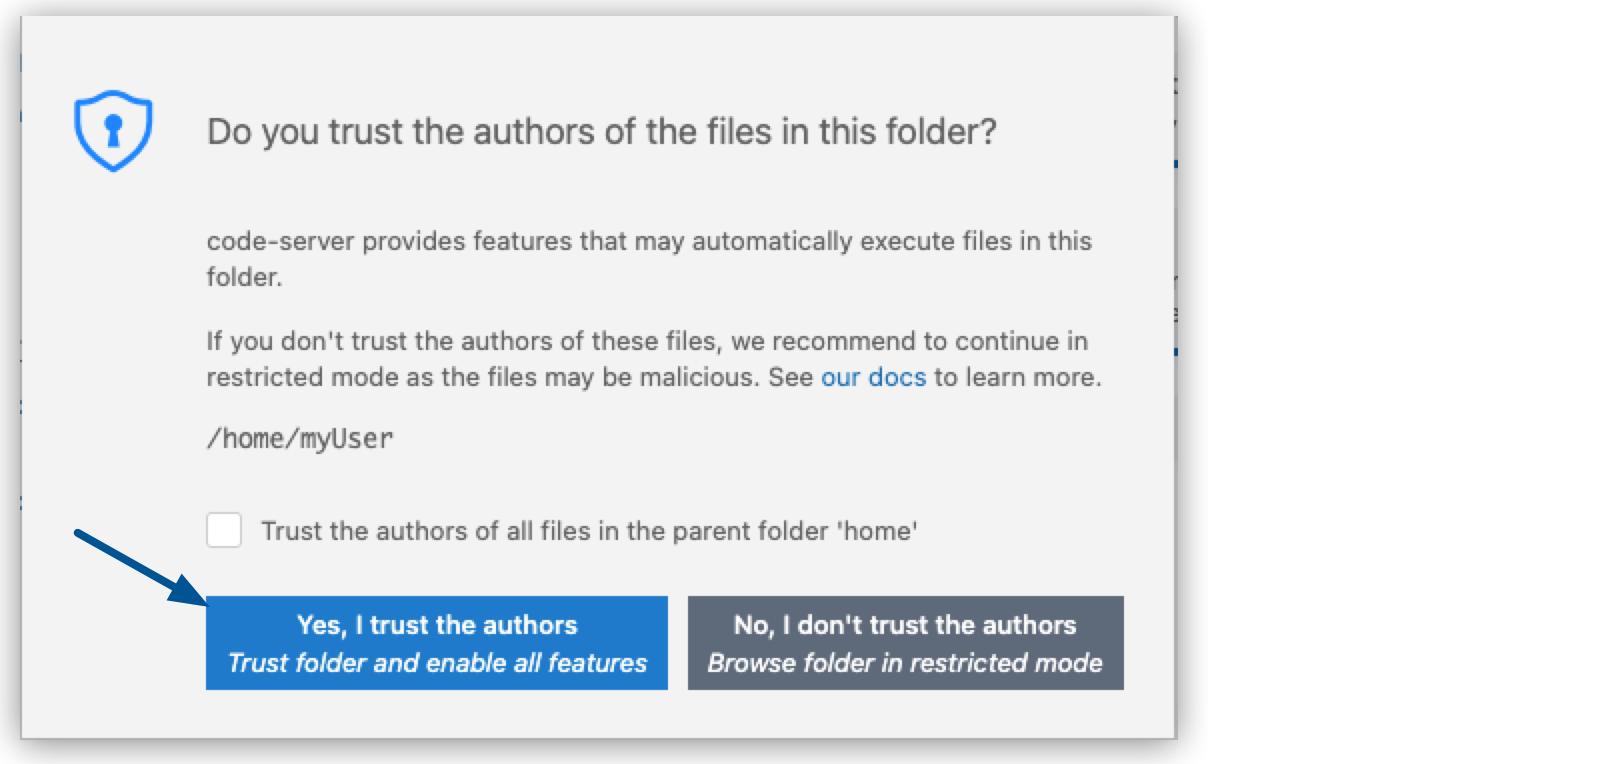 Trusting authors of the files in the folder